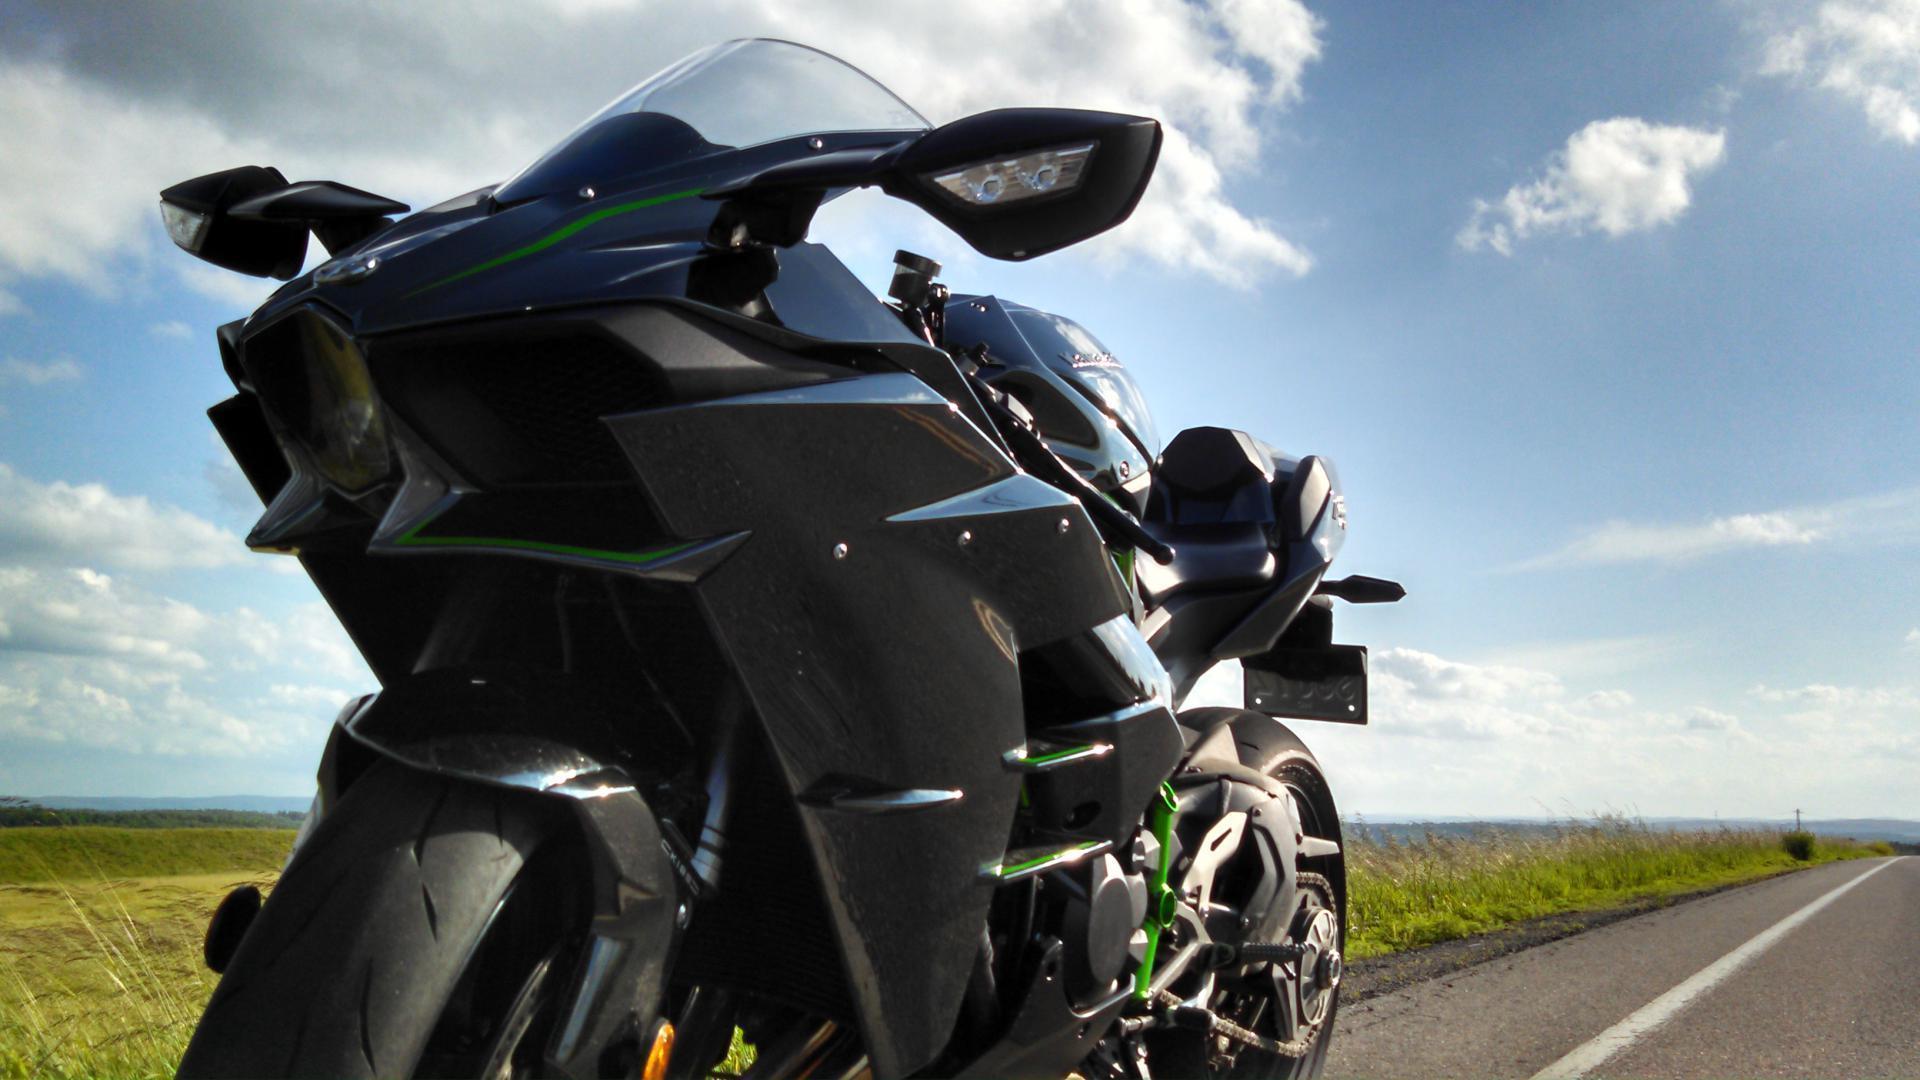 Ninja H2 Owners: Show Us Your Ninja H2 / H2R Pictures